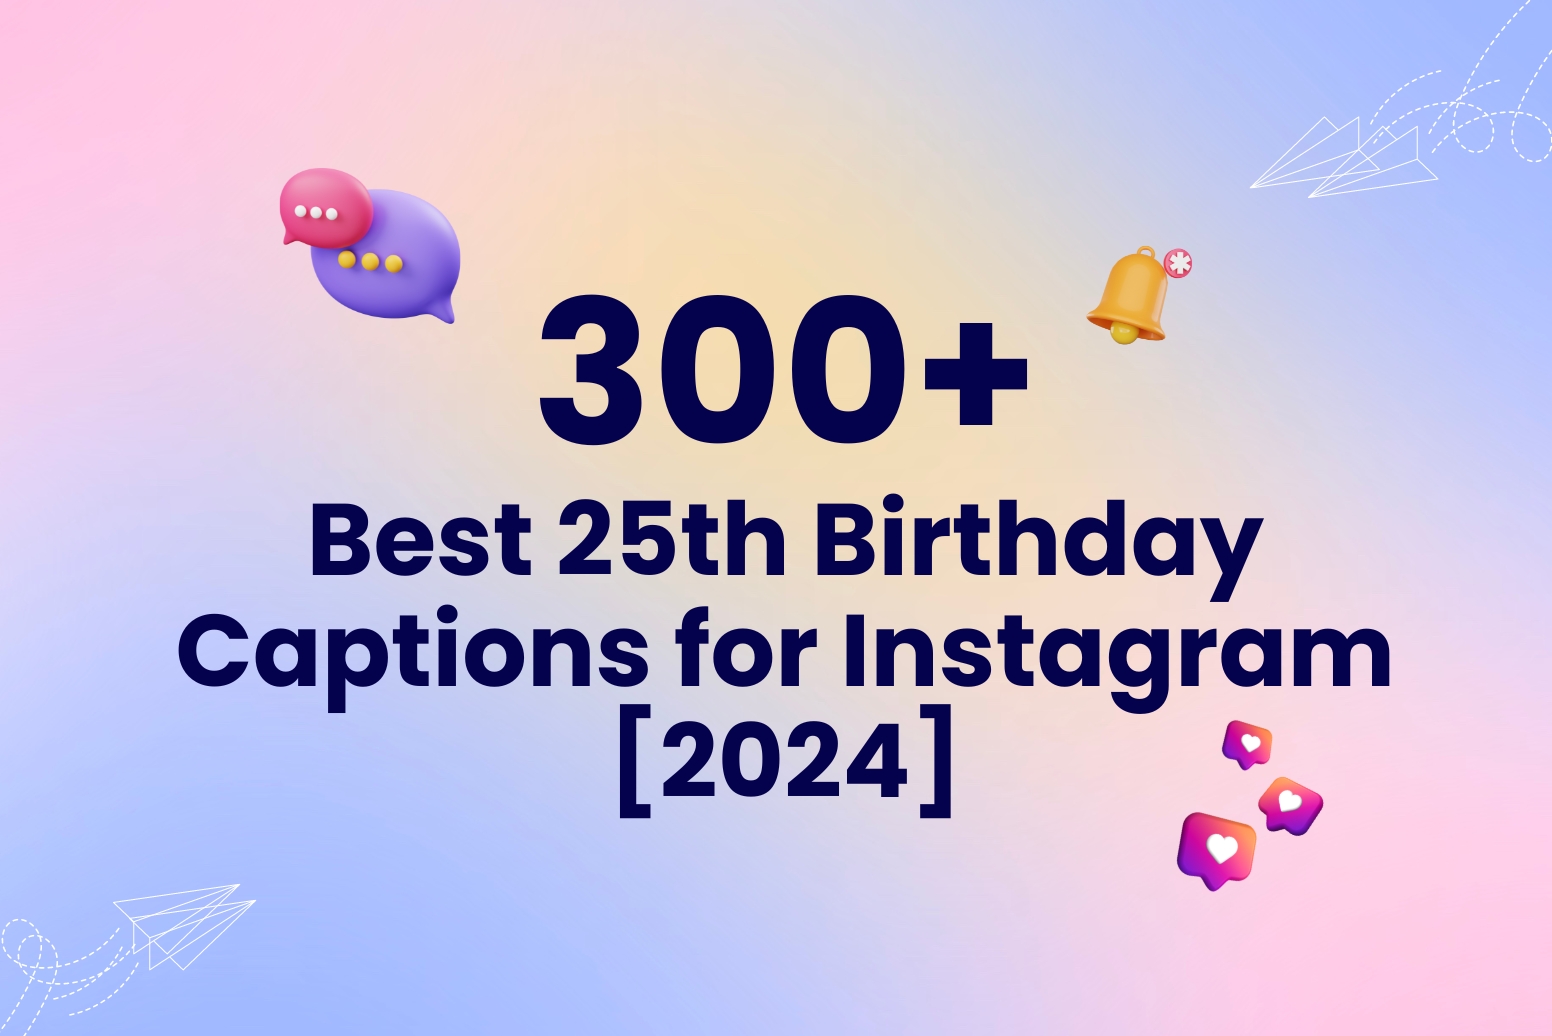 Best 25th Birthday Captions for Instagram